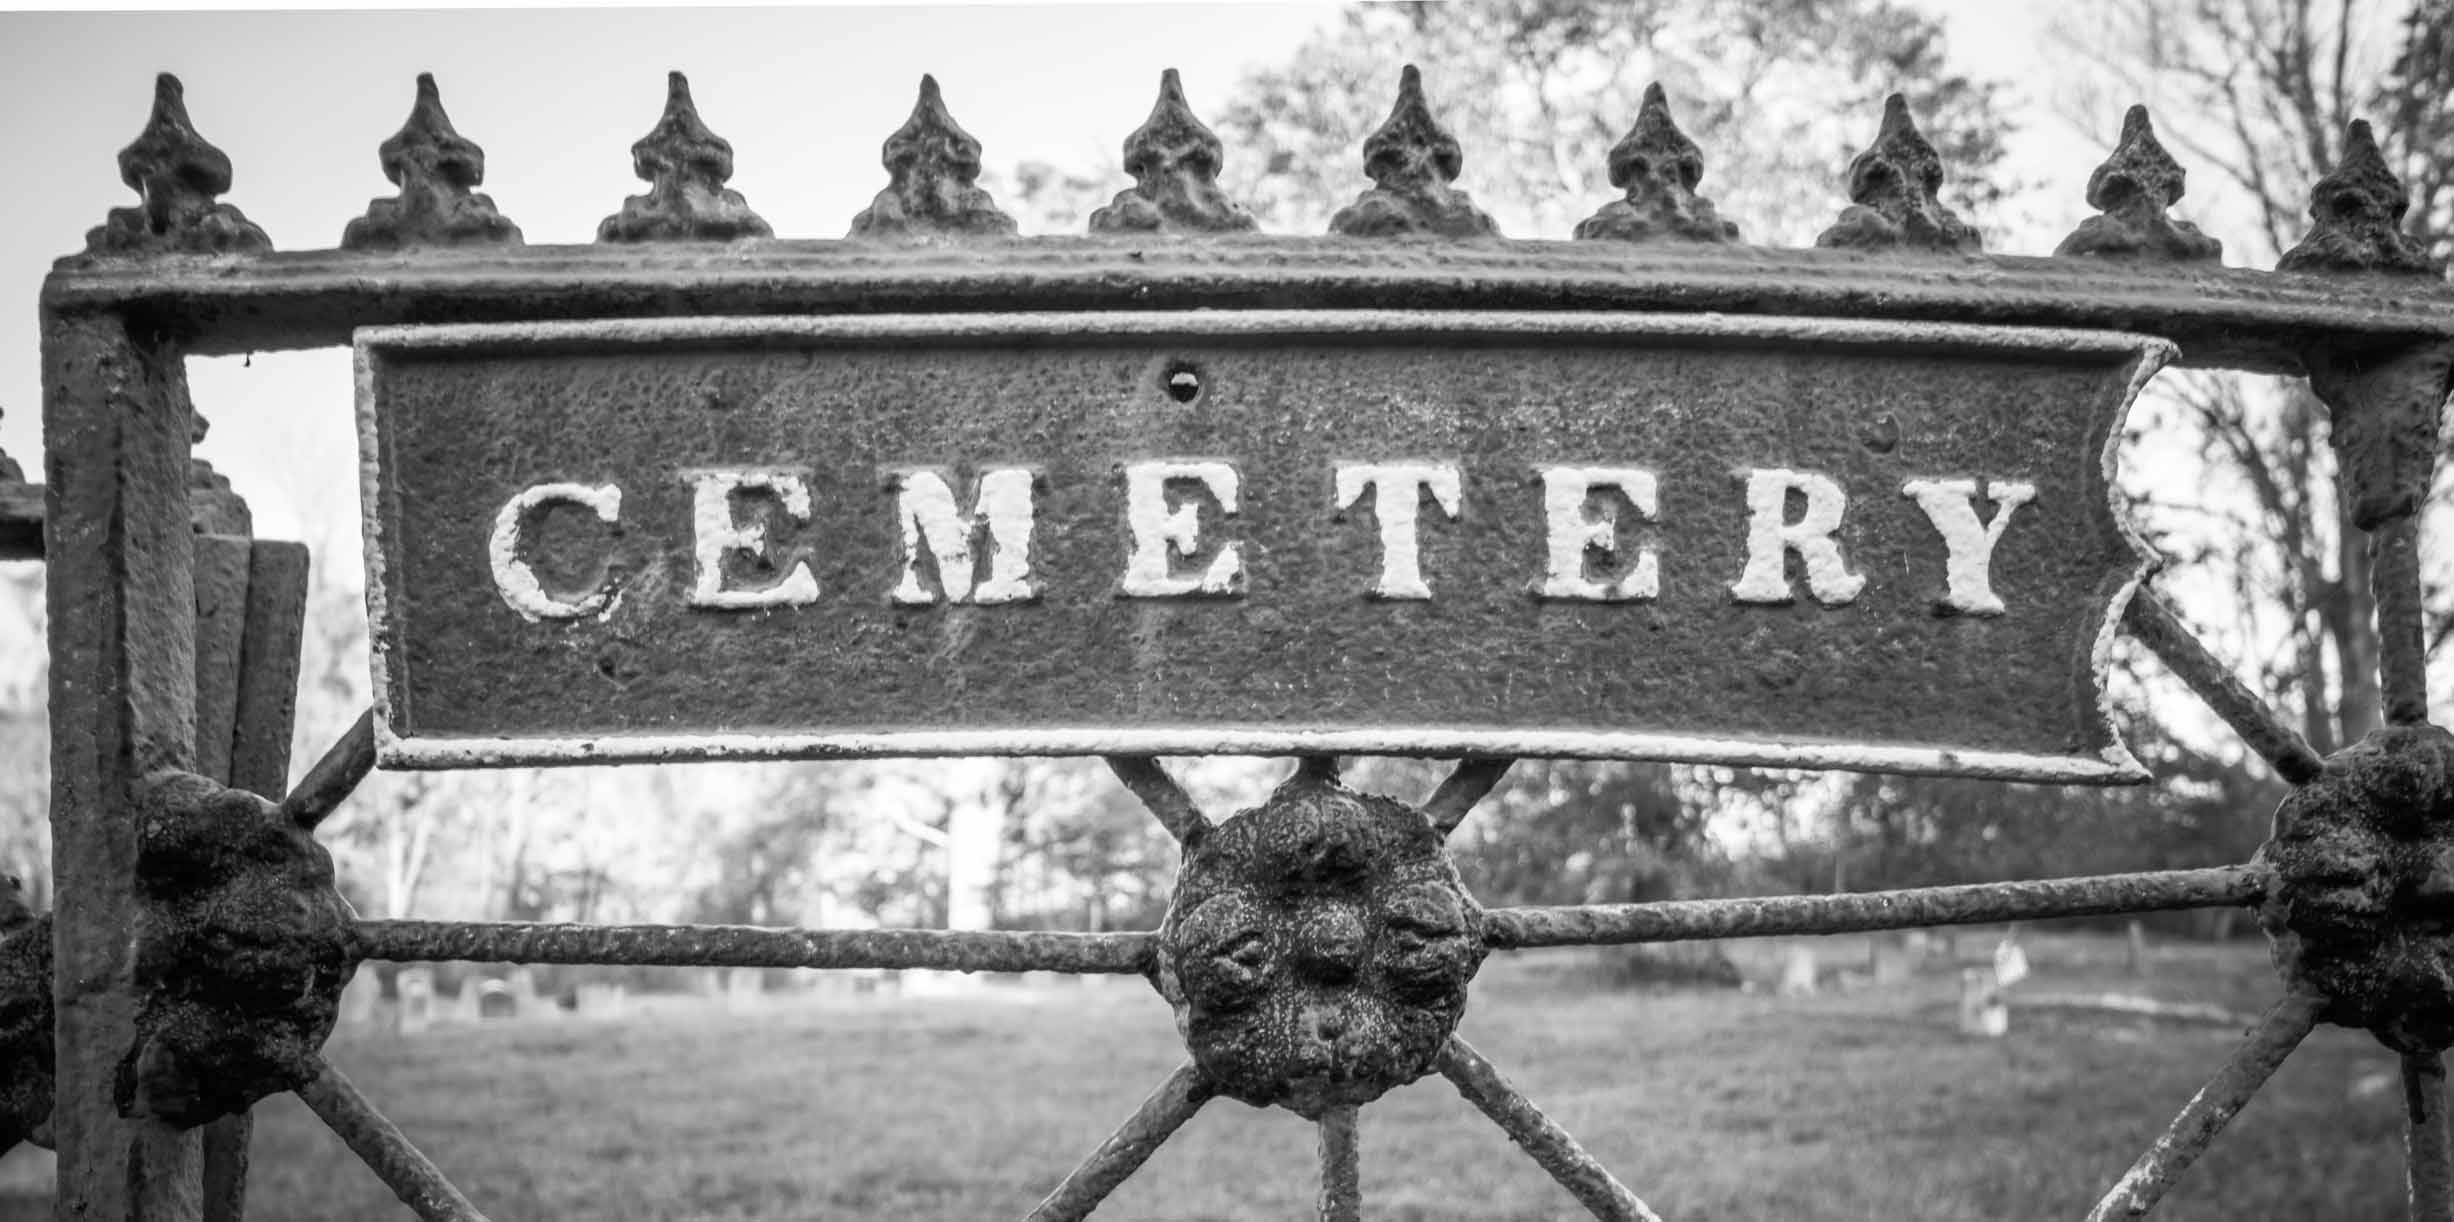 Need help find a cemetery?